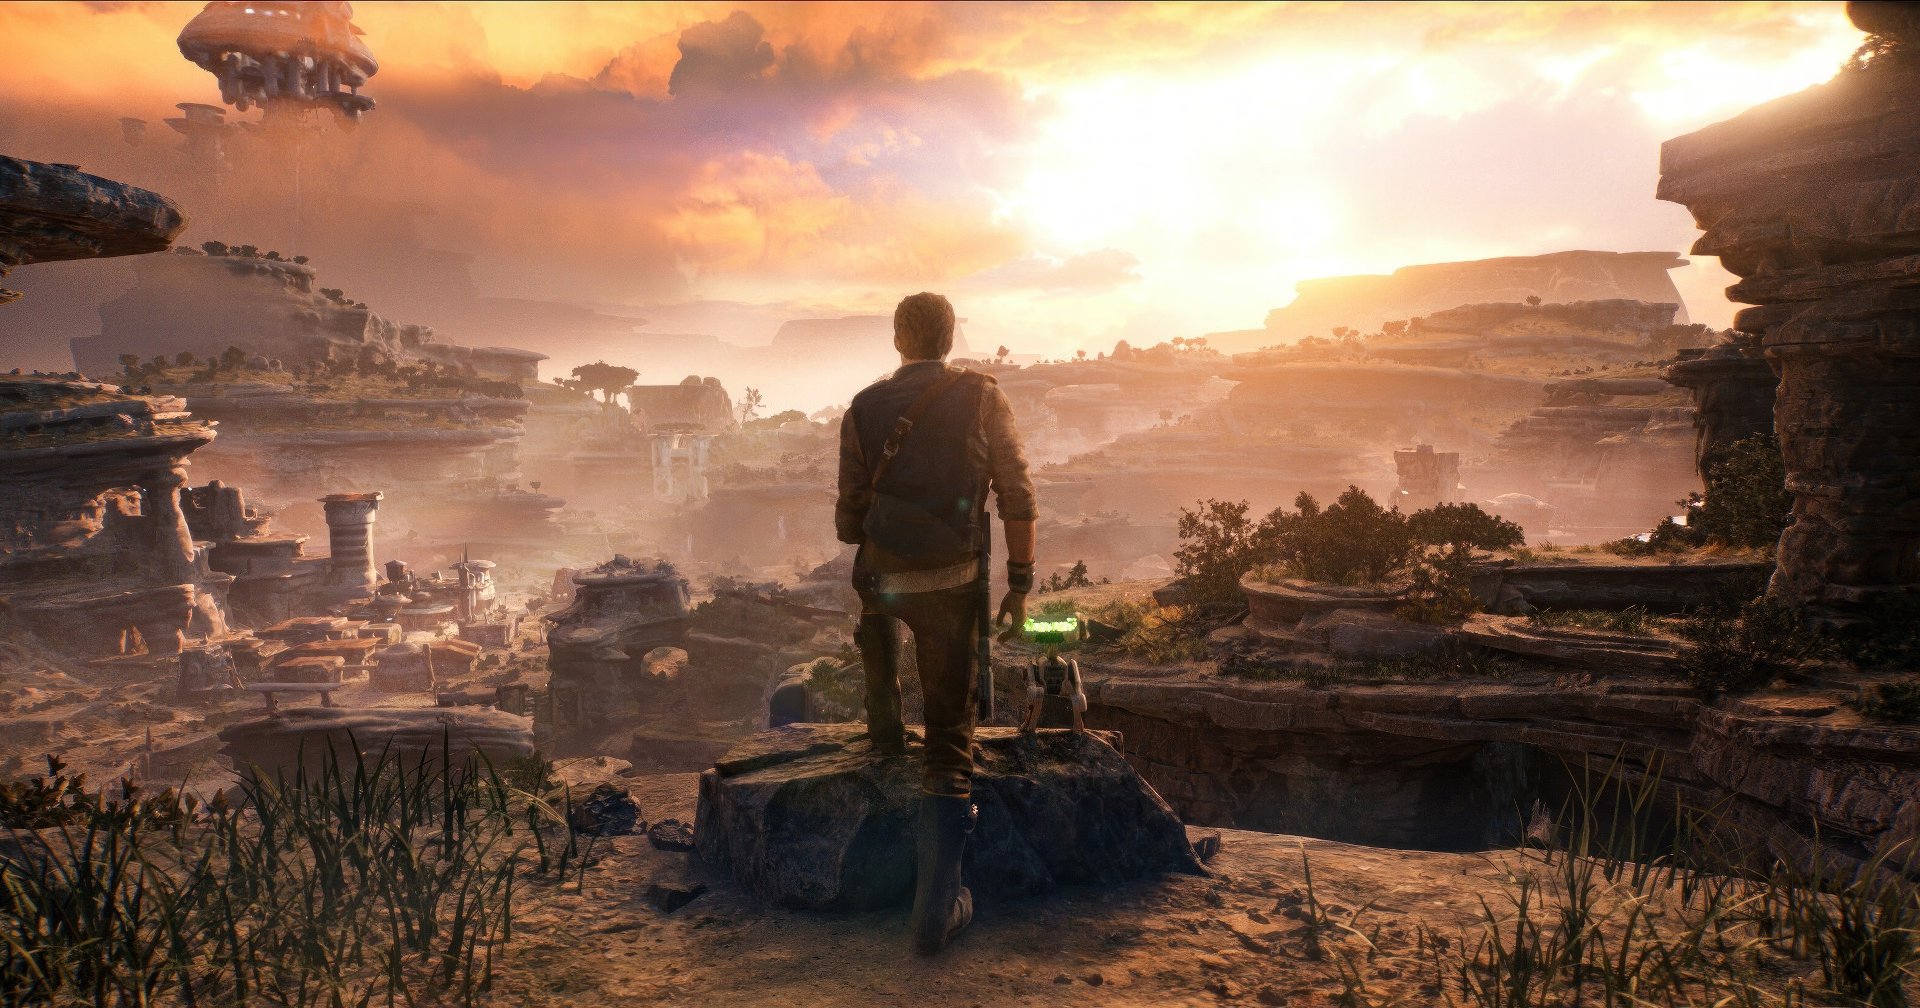 Cal Kestis looks into an alien stone landscape. The gameplay of Star Wars Jedi Survivor also takes place in such places.